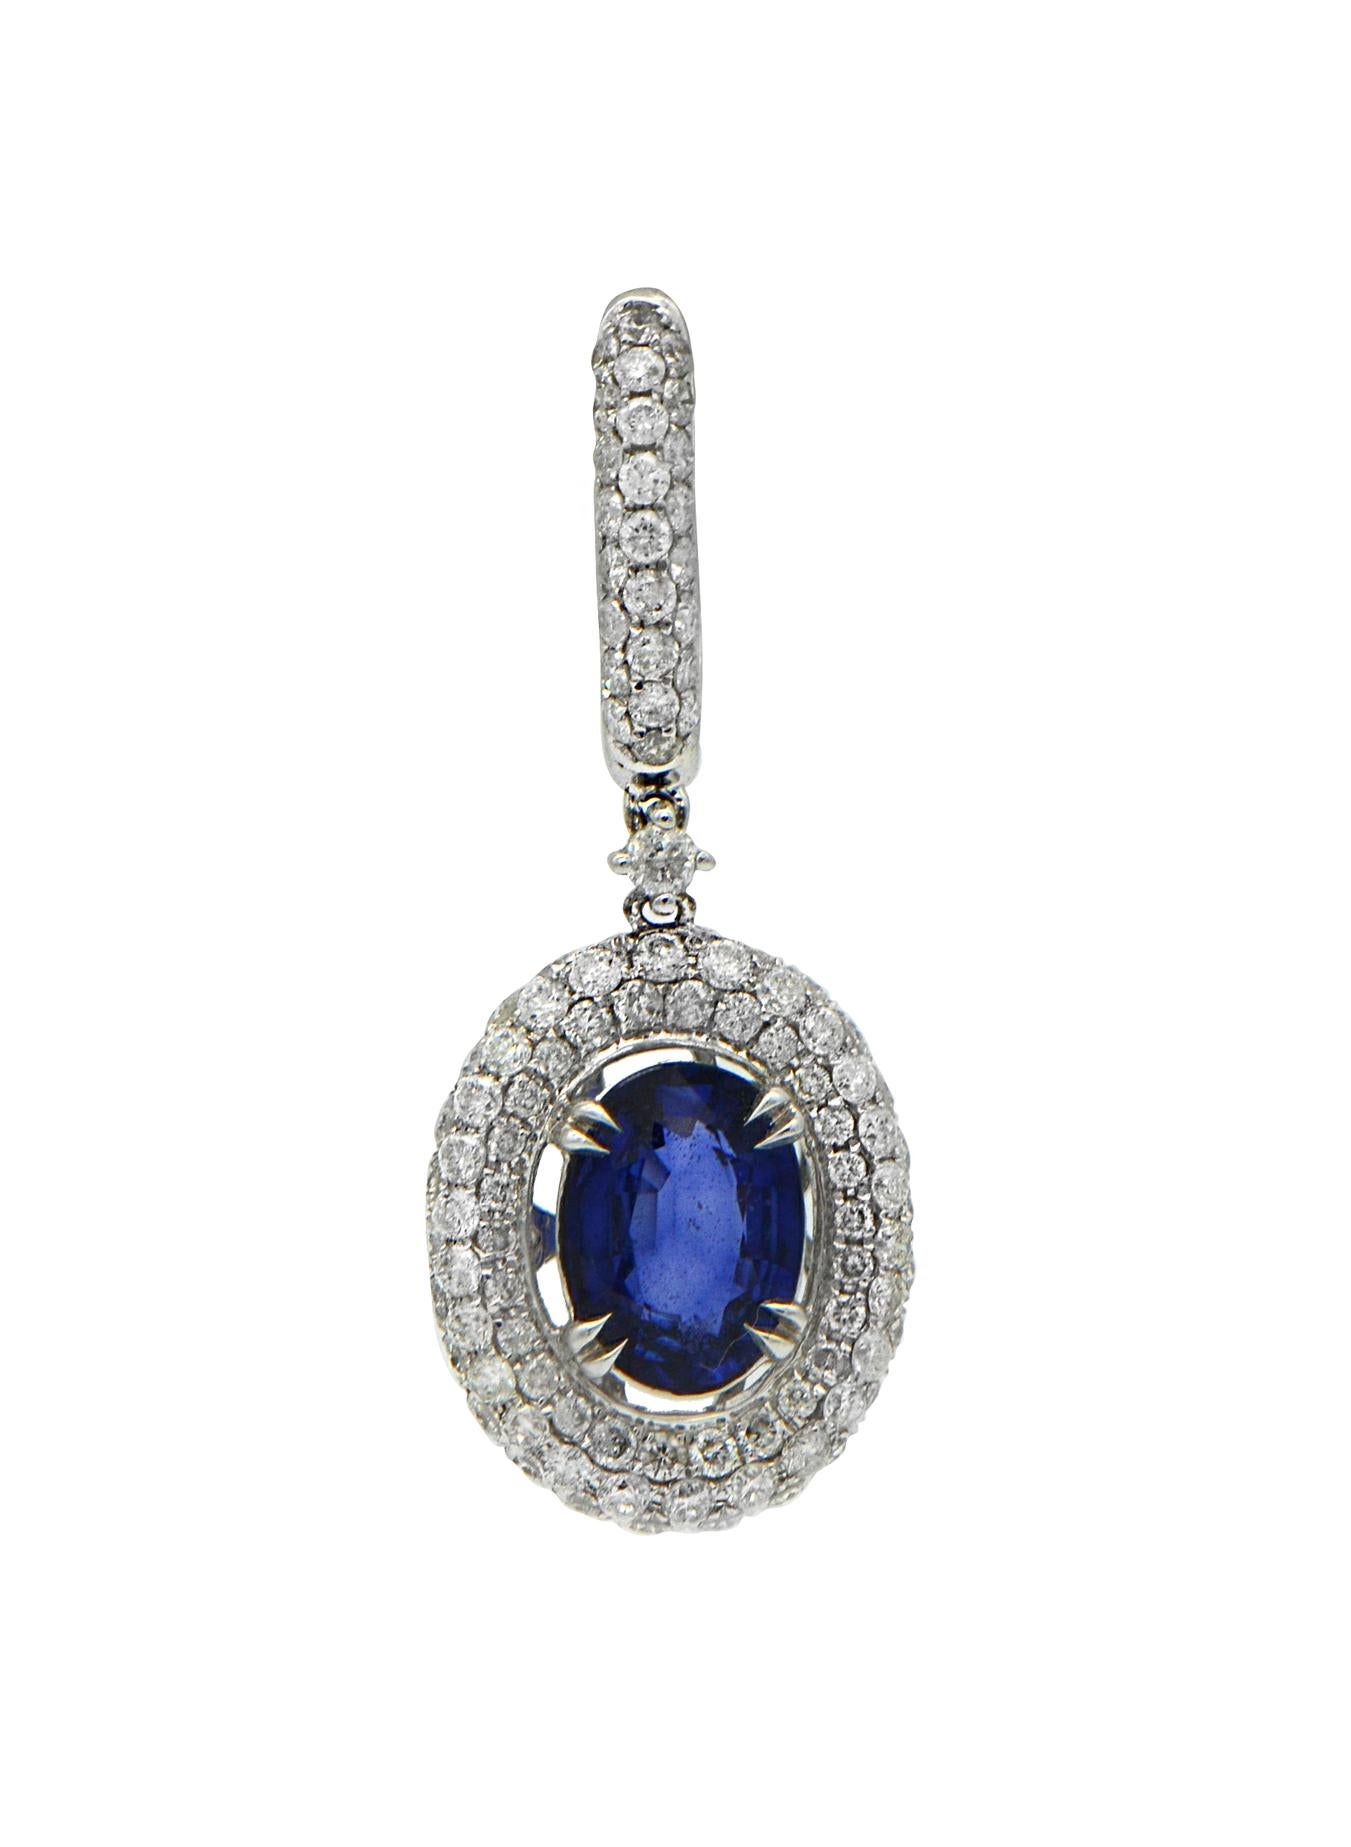 Oval Cut 5.01 Total Carat Fancy Sapphire Earrings with Pave Diamond Halo in 18K White Gol For Sale